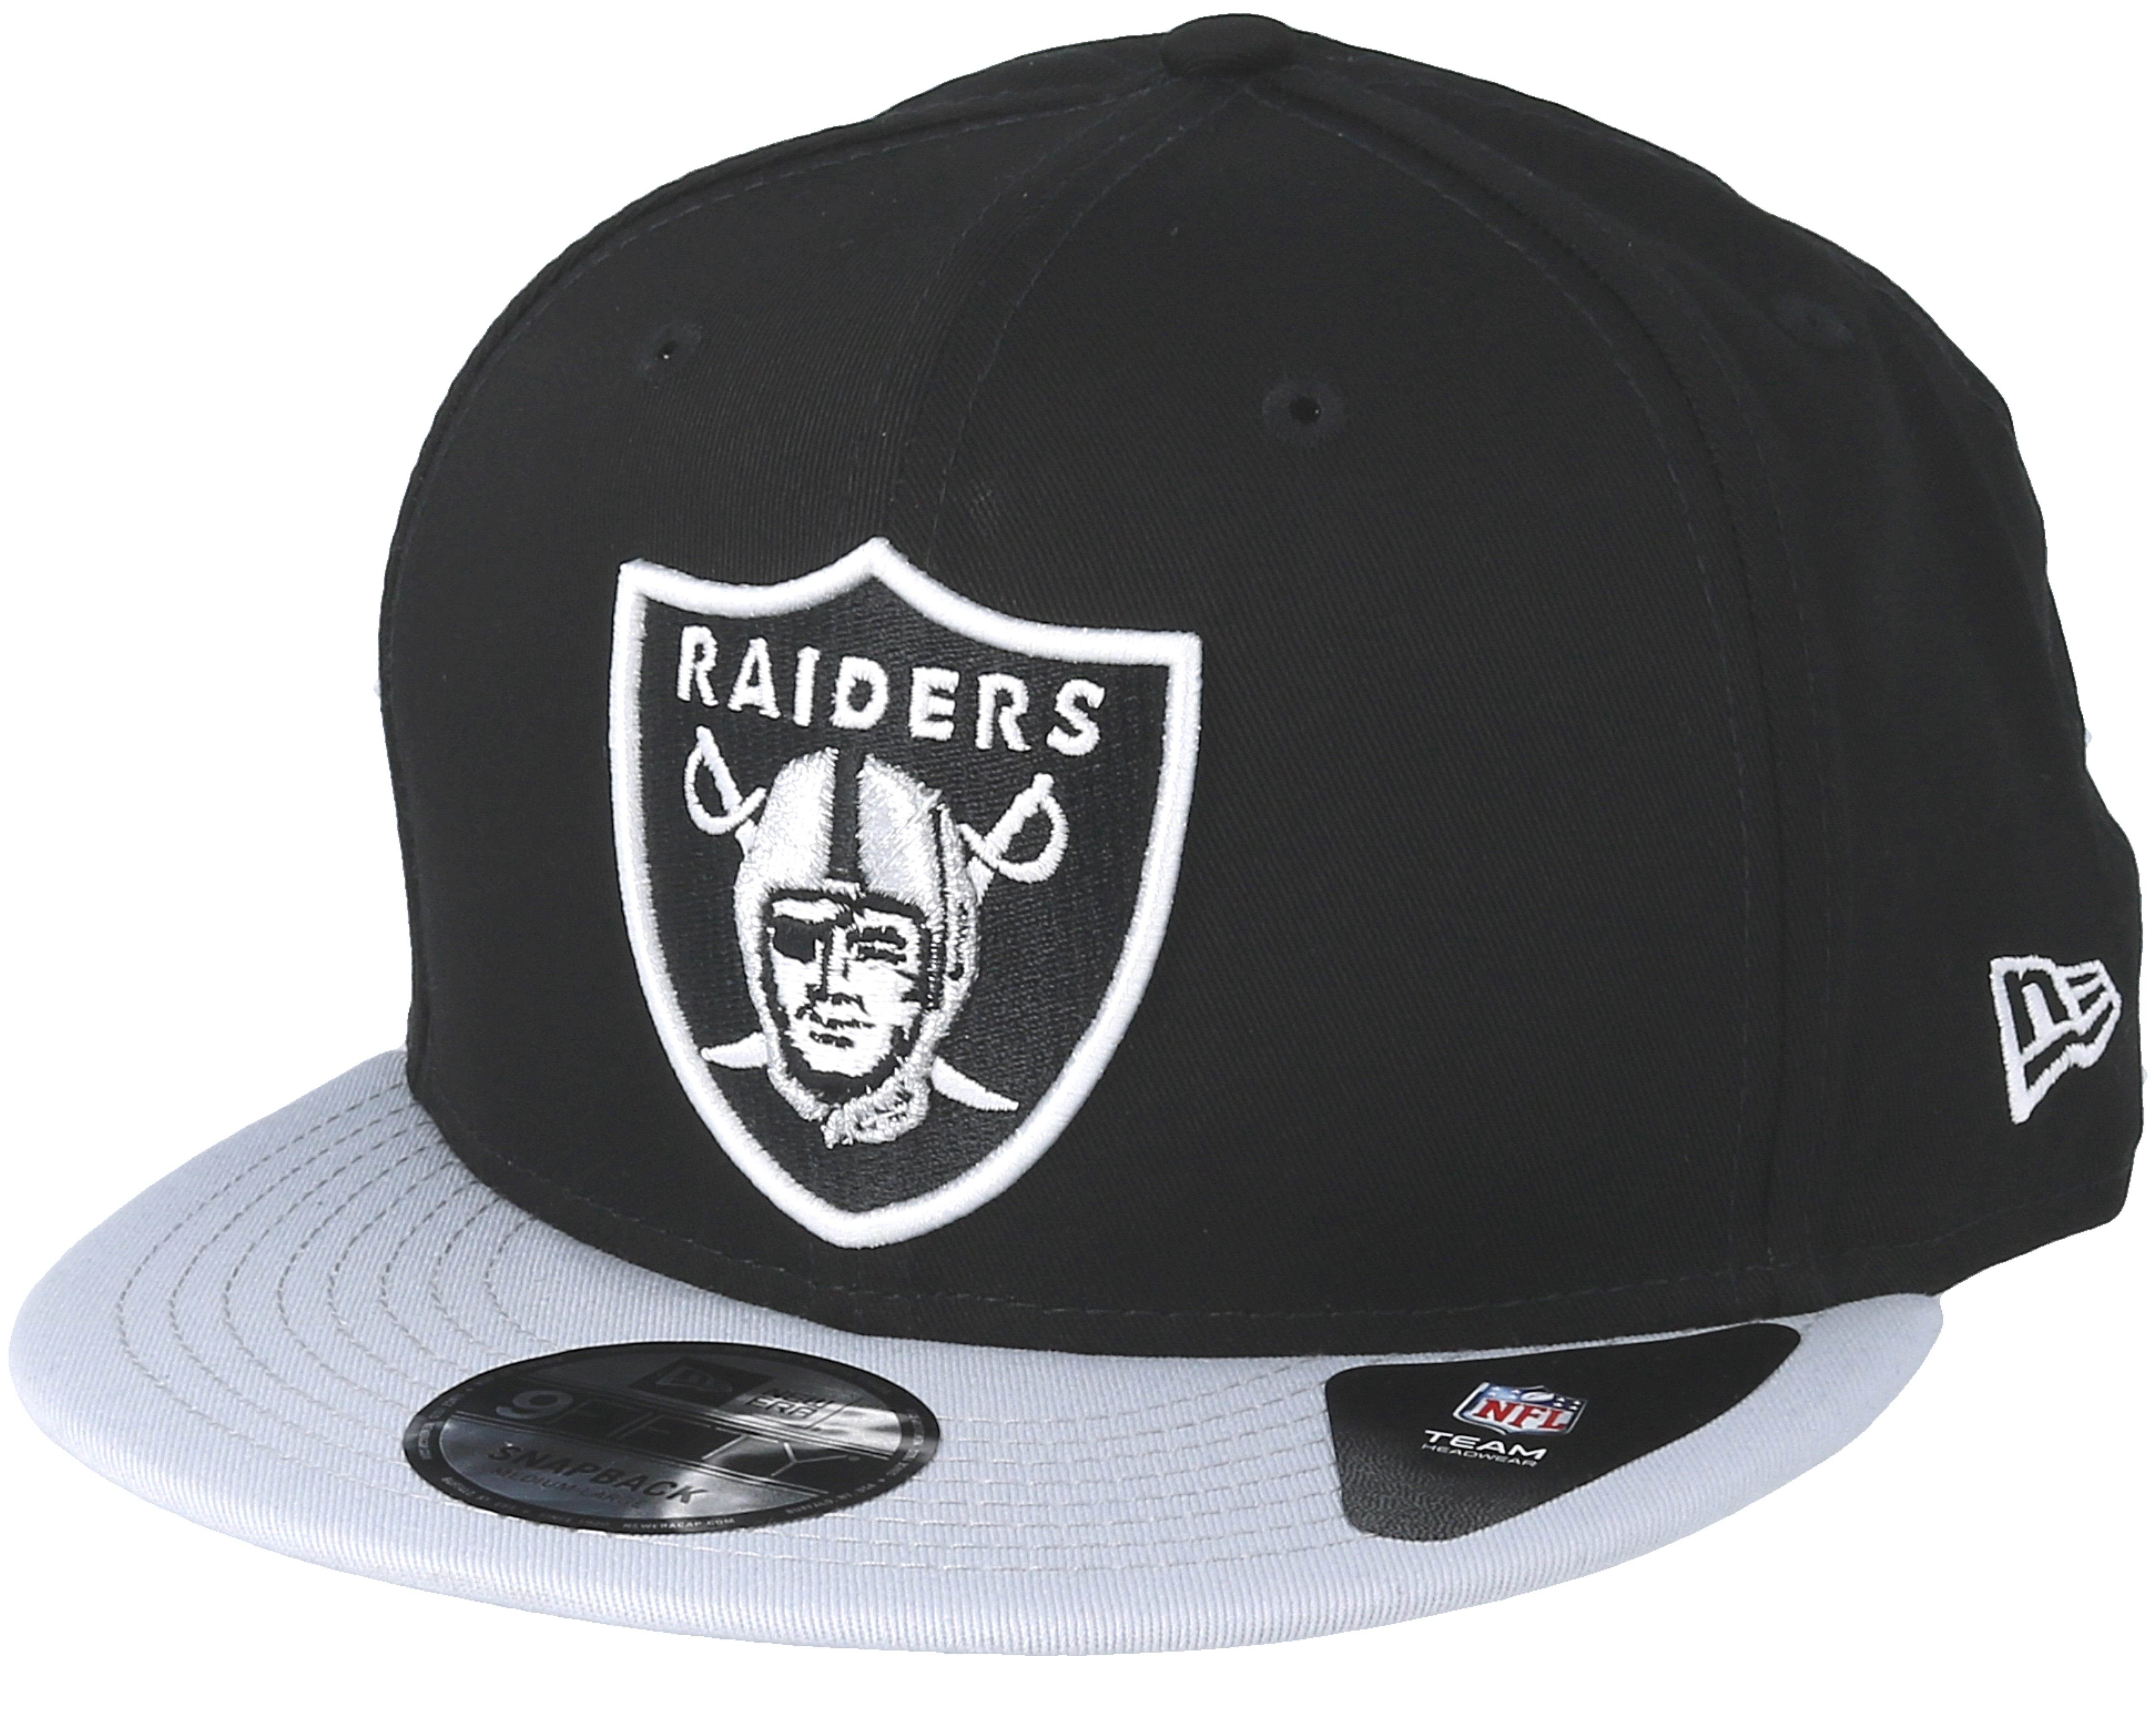 Oakland Raiders NFL Cotton 9fifty - New 